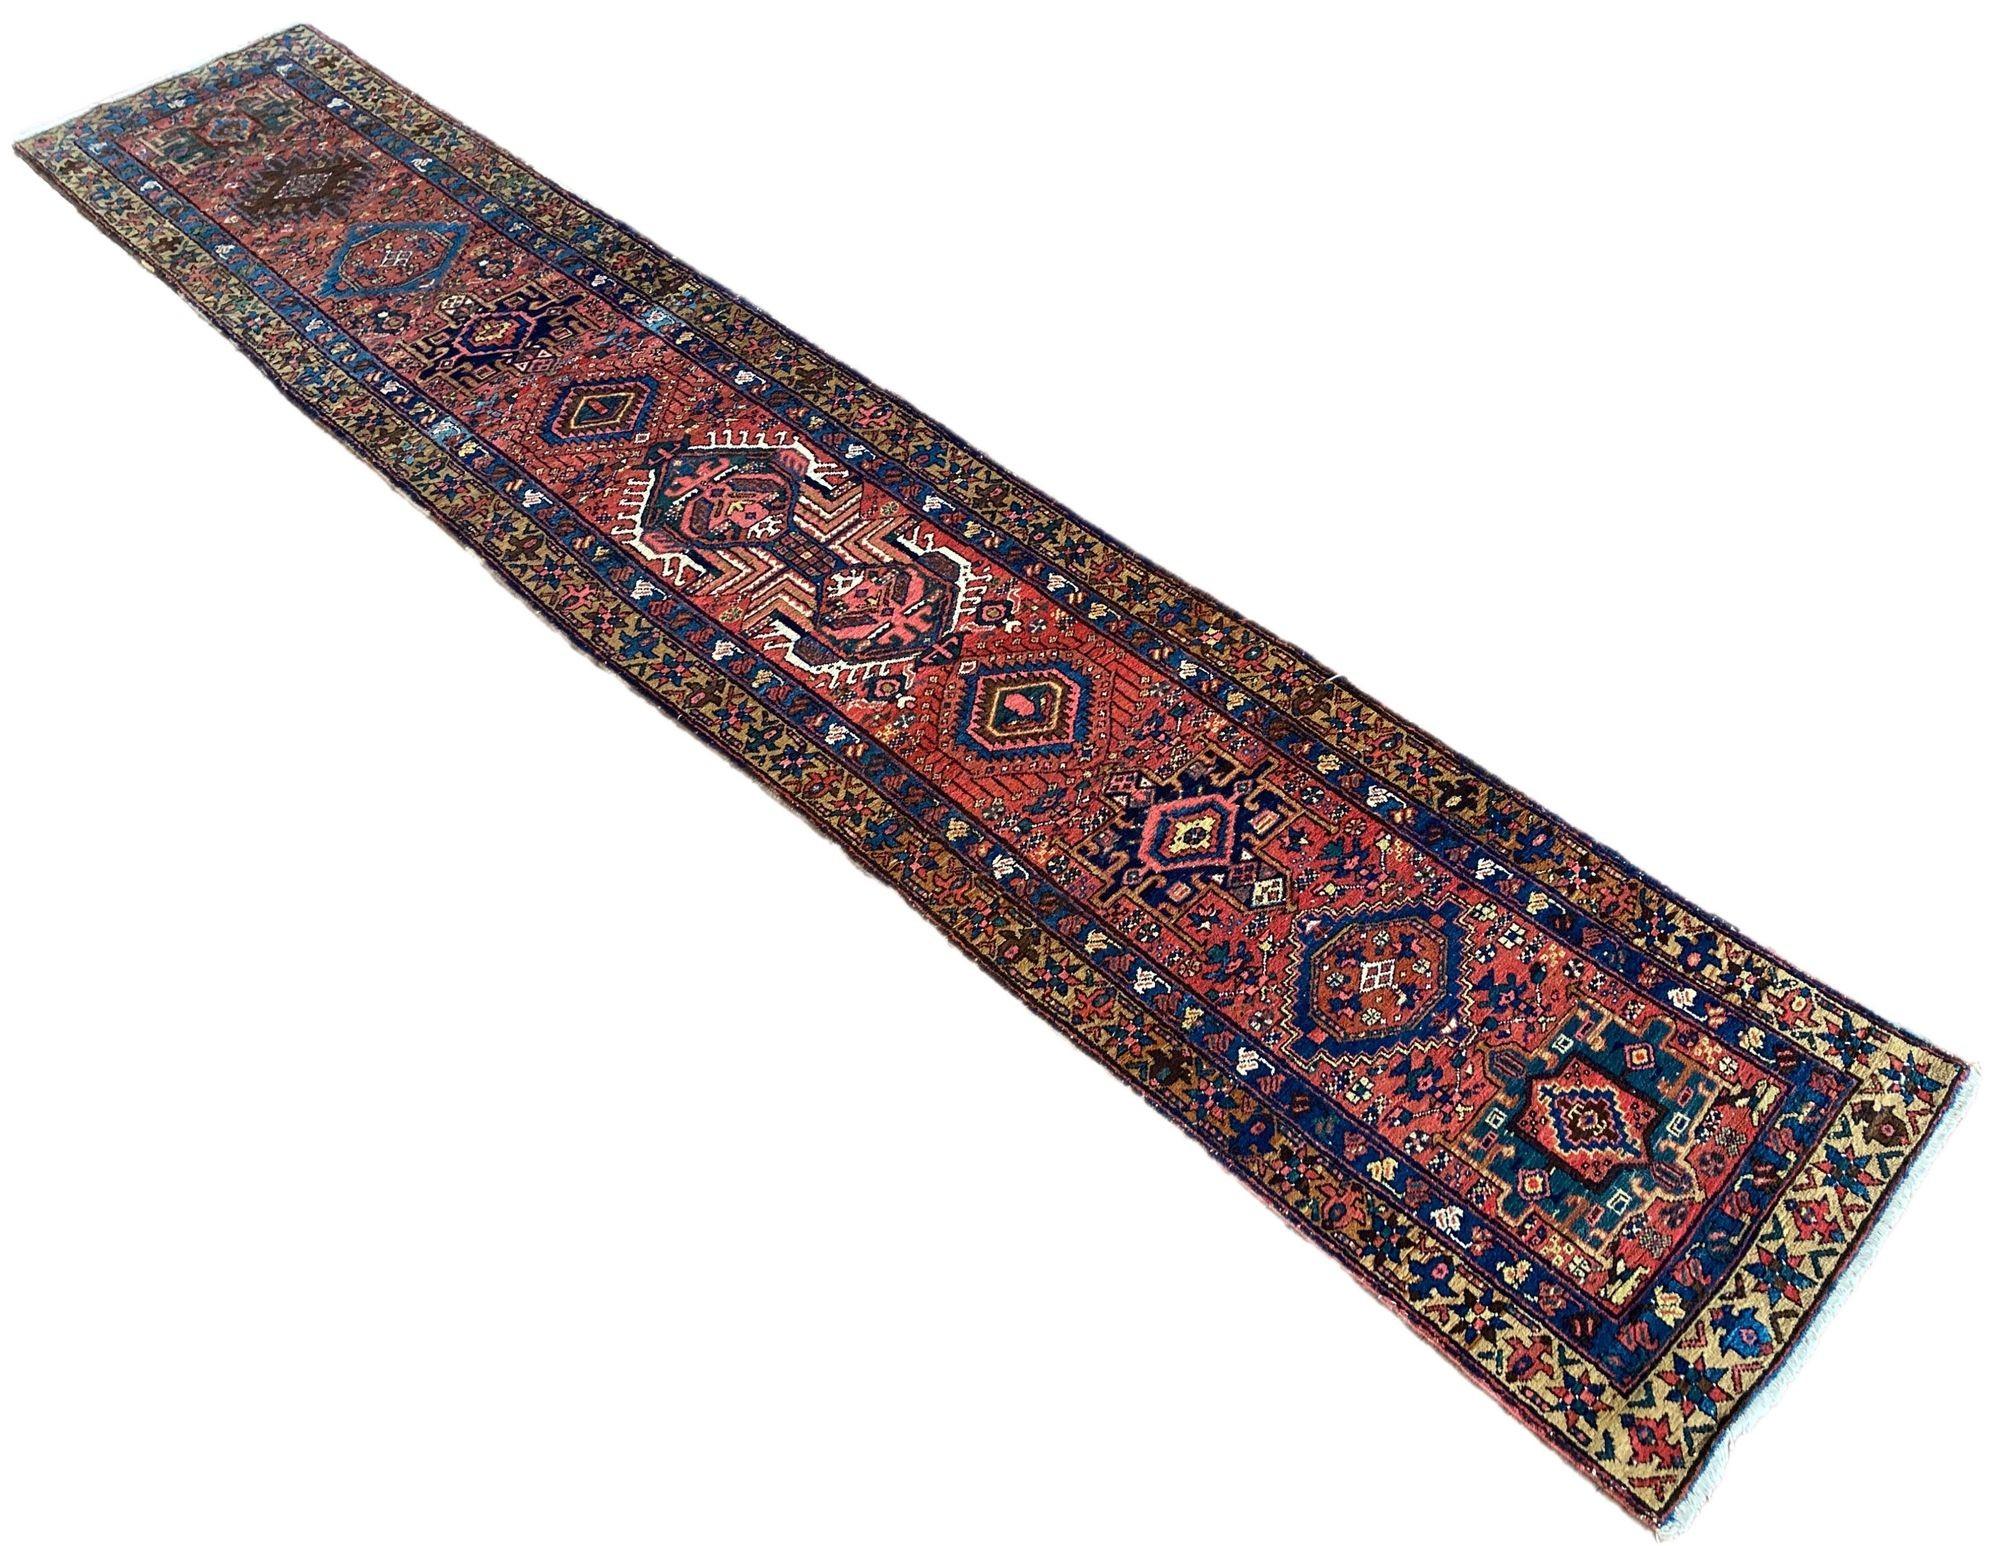 Antique Heriz Runner 4.70m x 0.87m In Good Condition For Sale In St. Albans, GB